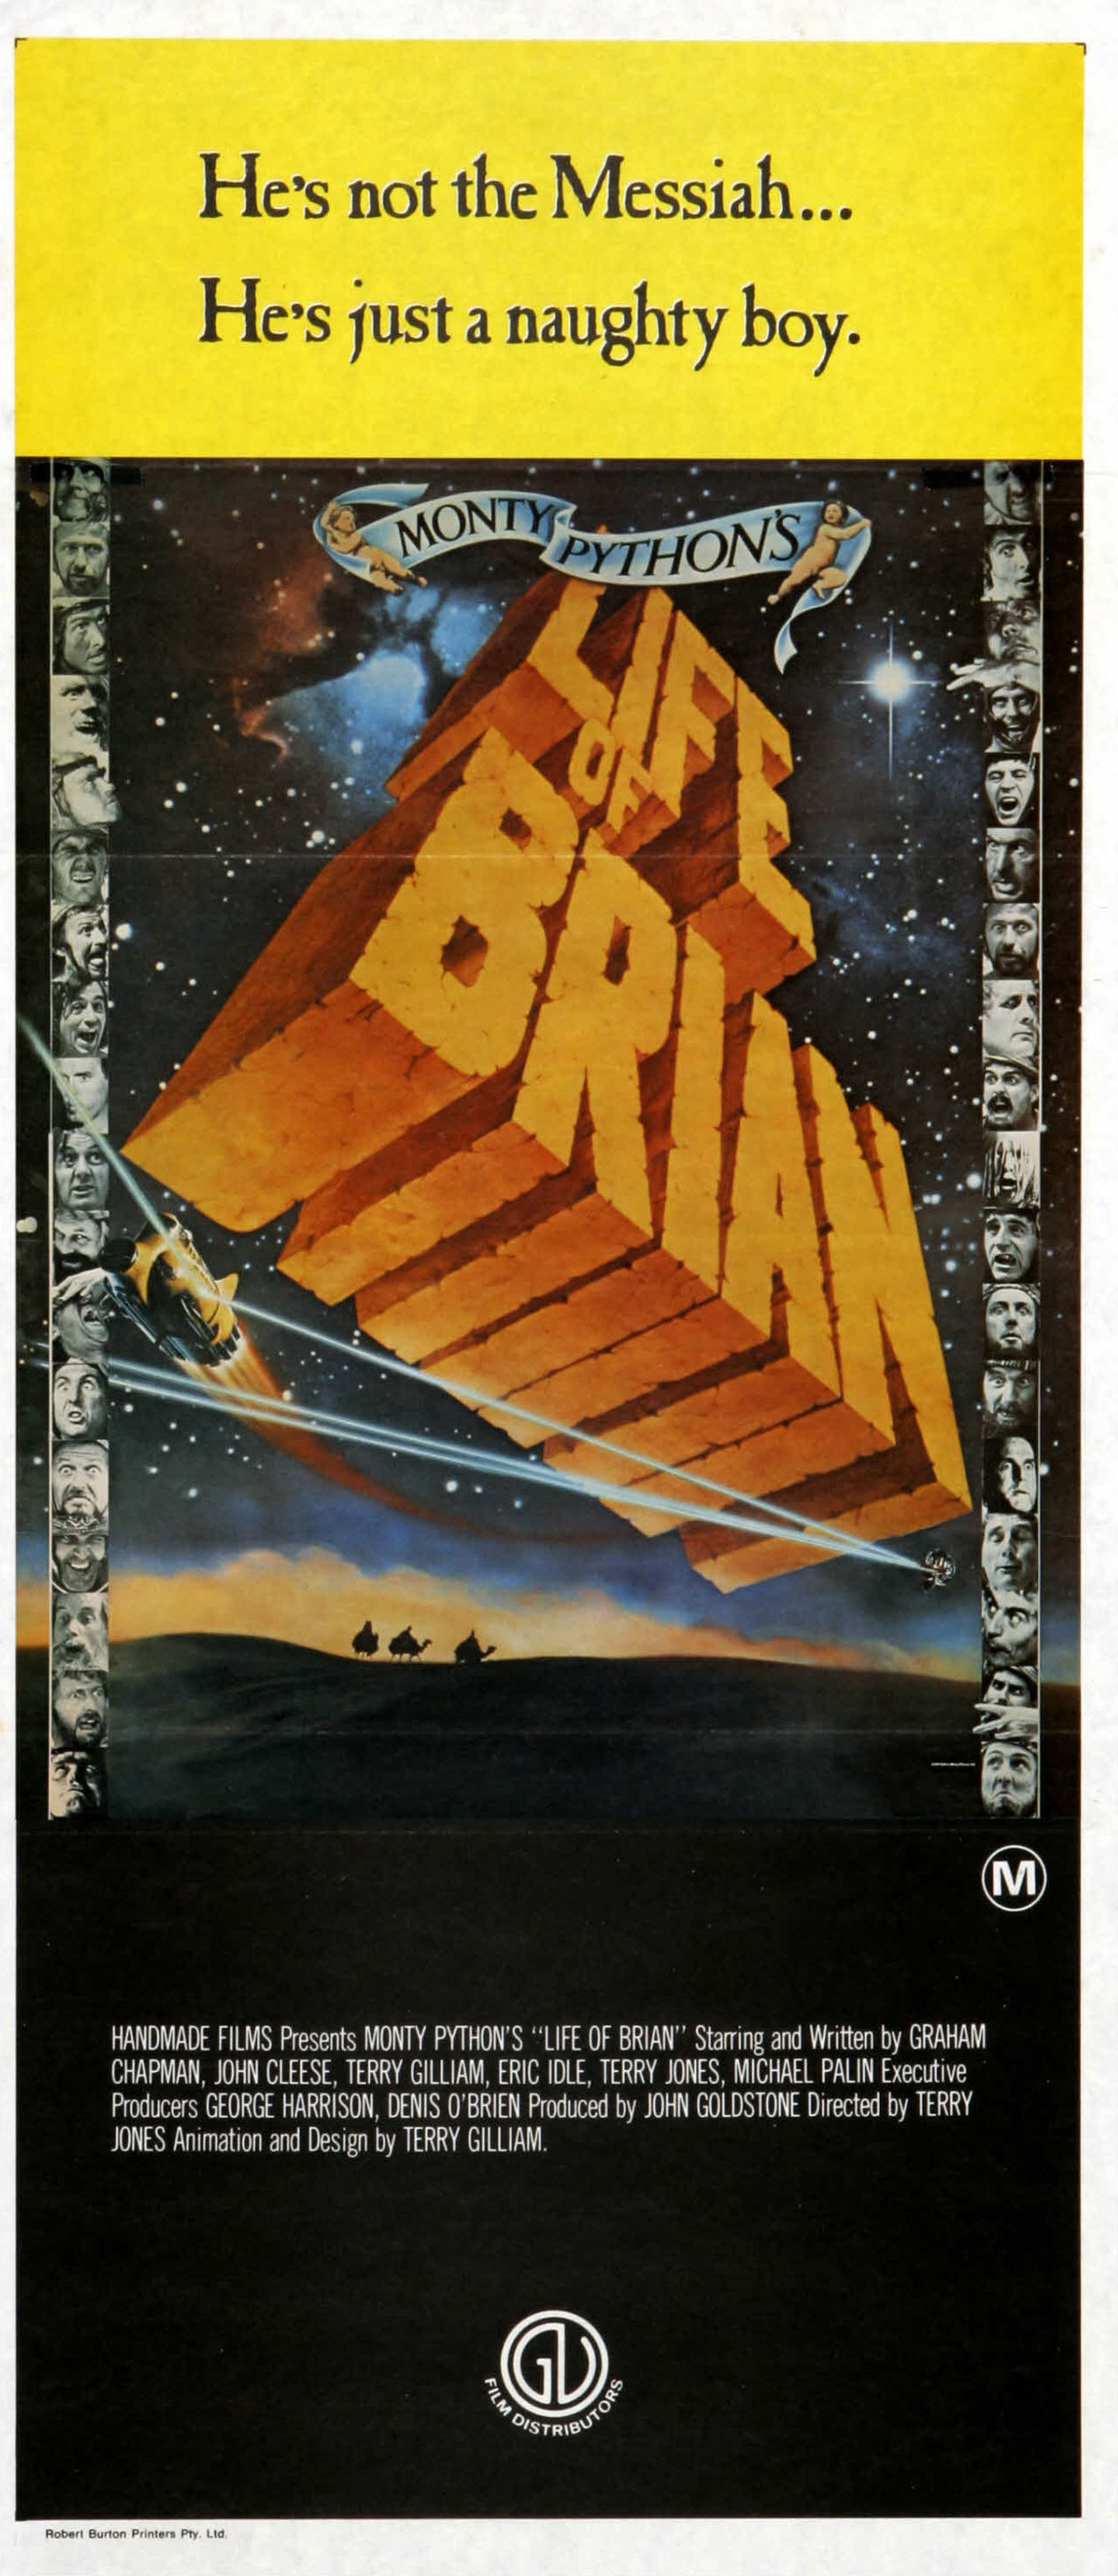 Mega Sized Movie Poster Image for Monty Python's Life of Brian (#5 of 7)